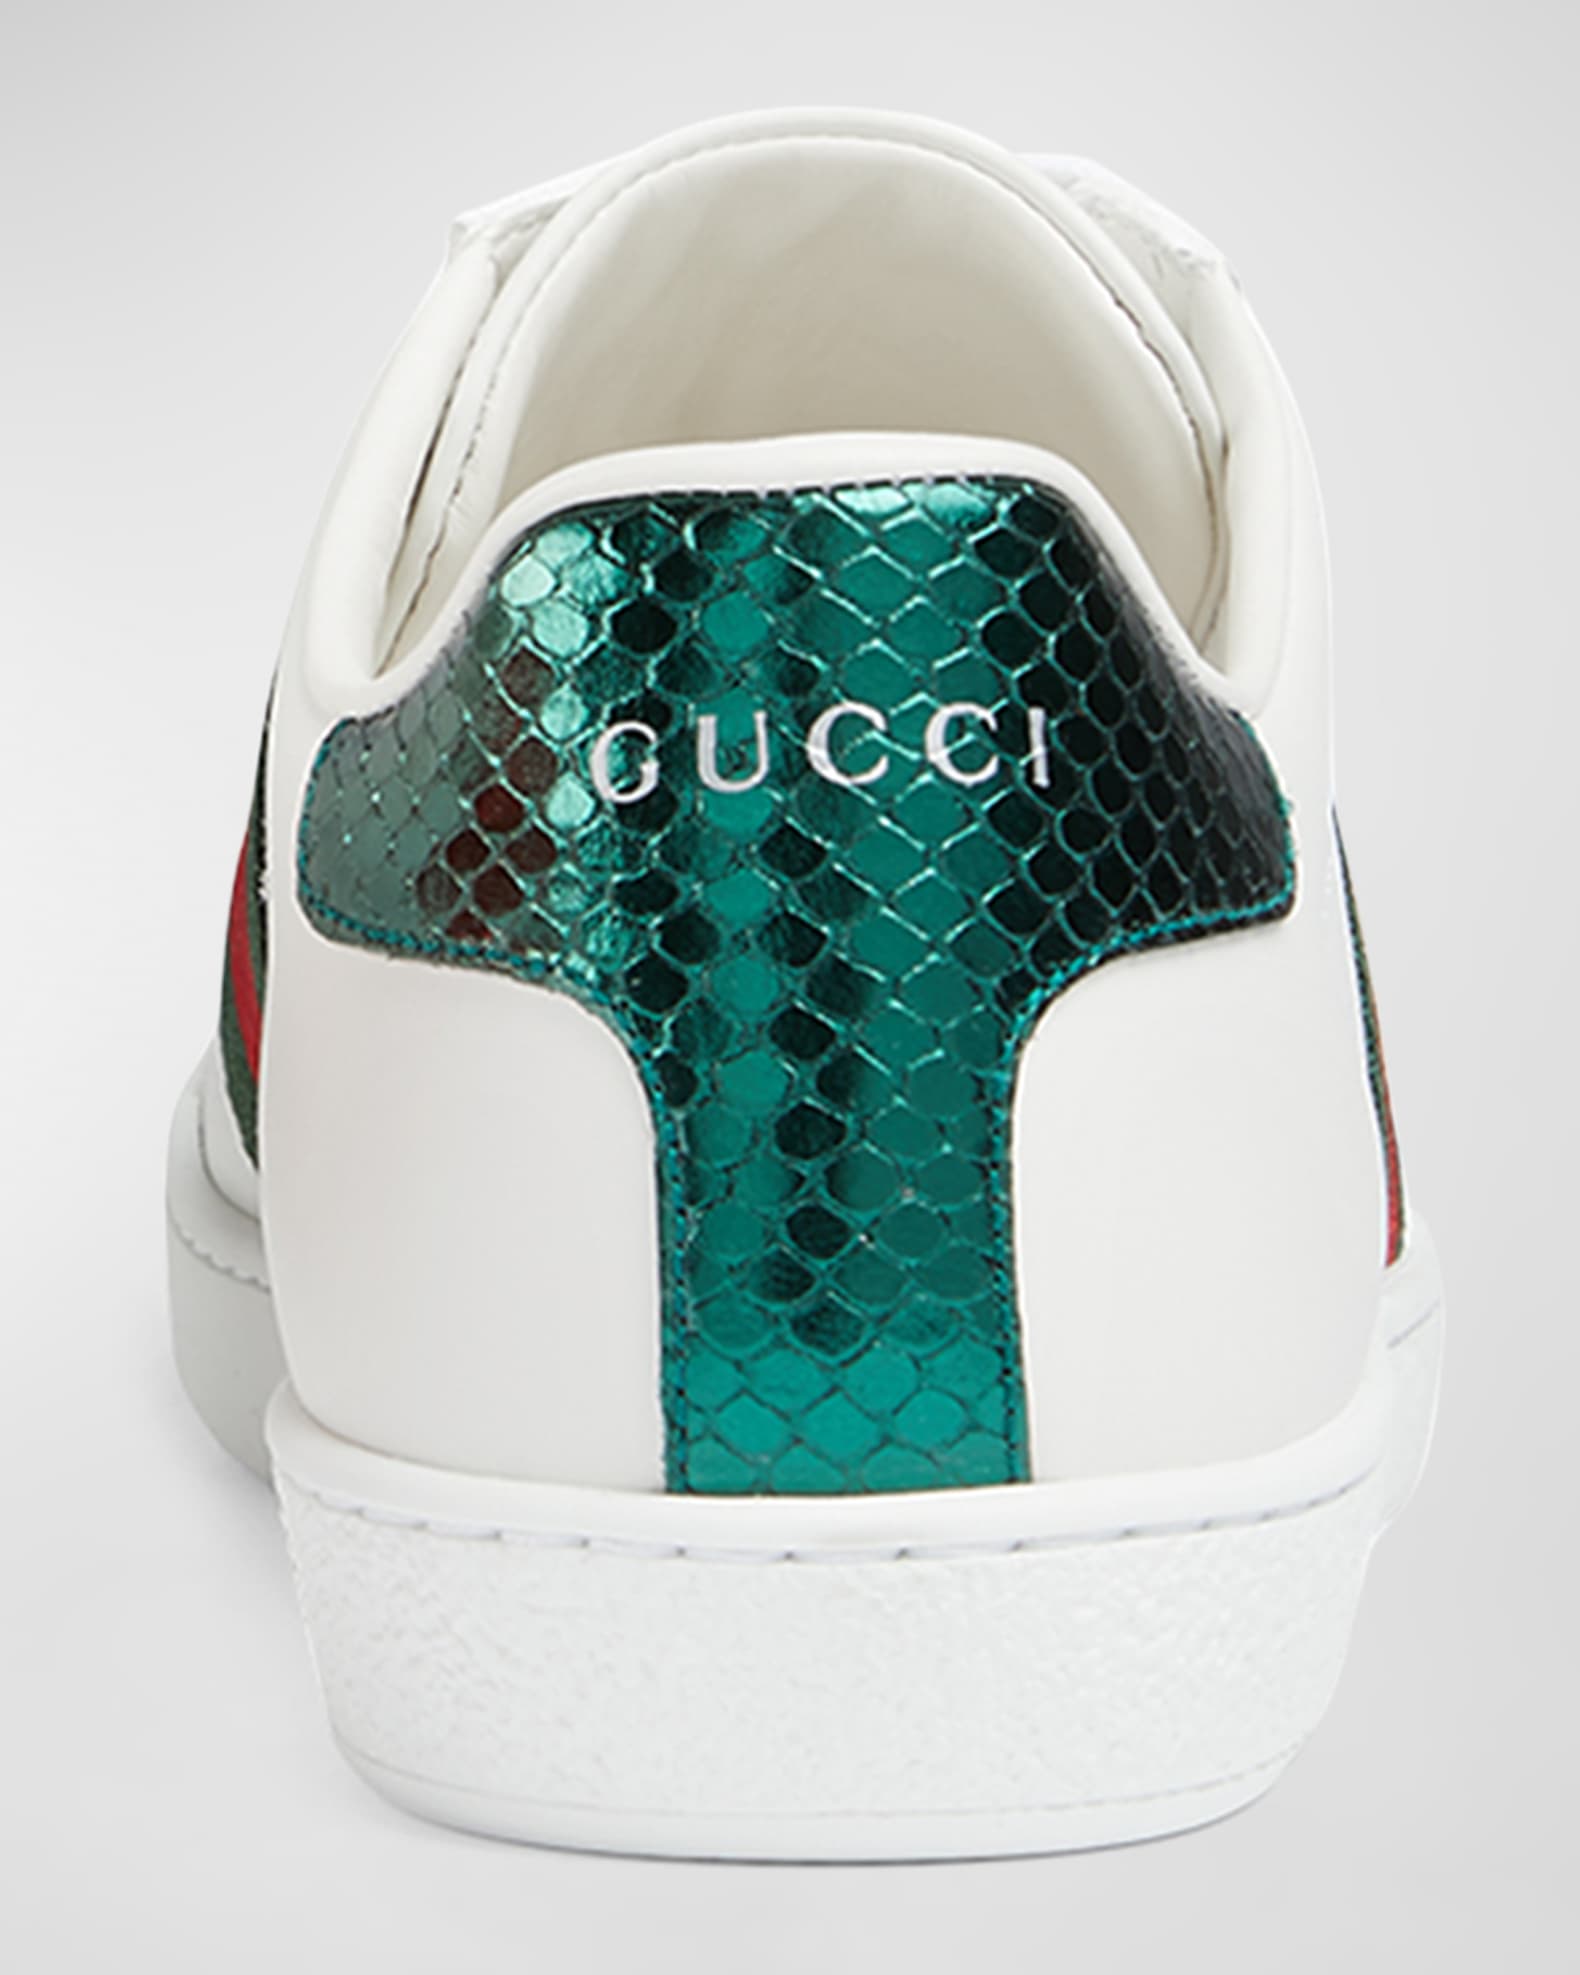 Gucci Men's New Ace GRG Bee Sneakers